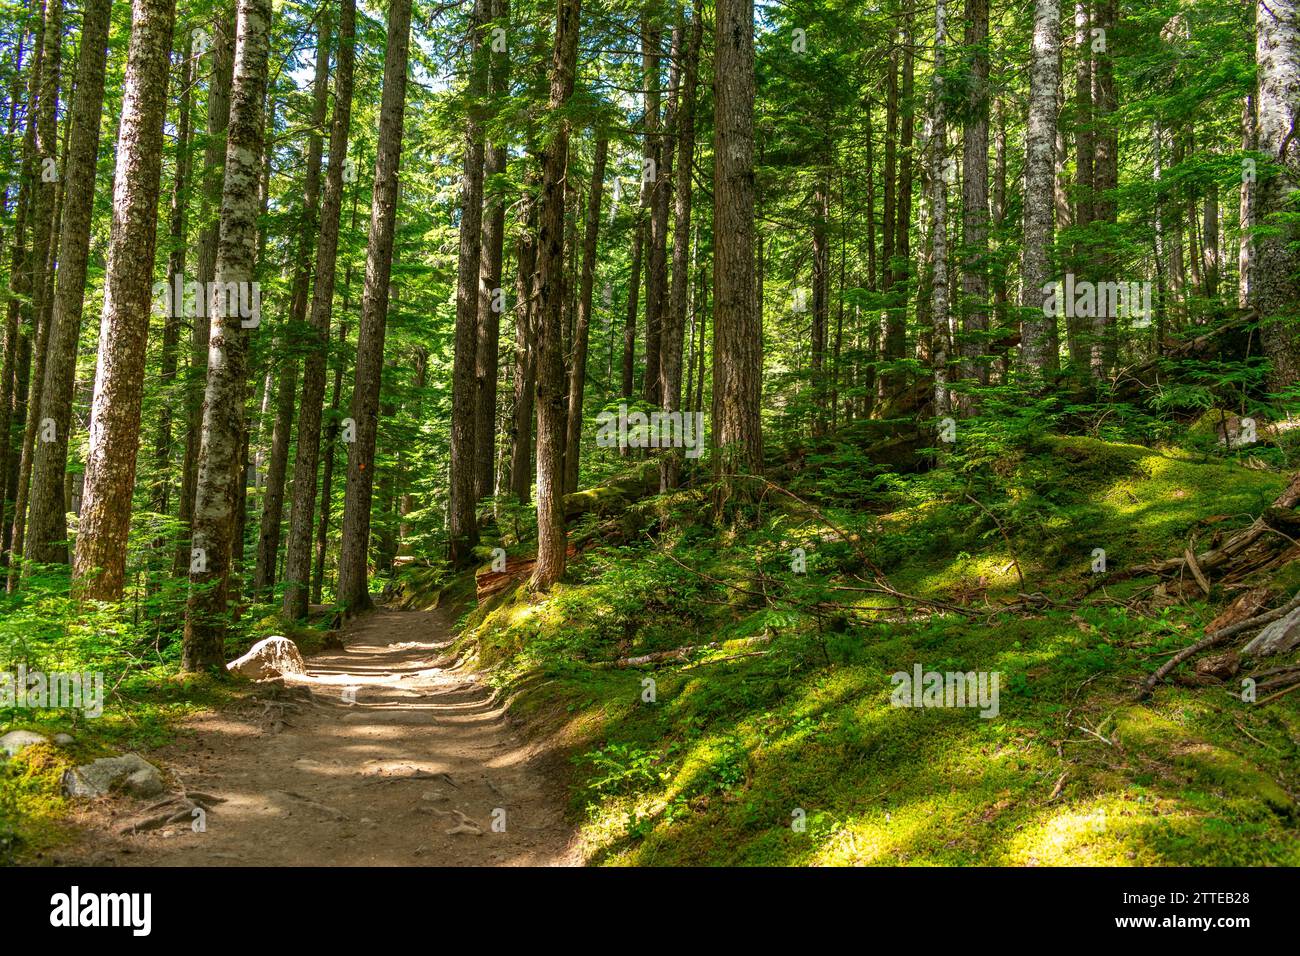 The Cheakamus Lake Trail winds through a vibrant old-growth forest, offering a sun-dappled journey into the heart of British Columbia's natural splend Stock Photo